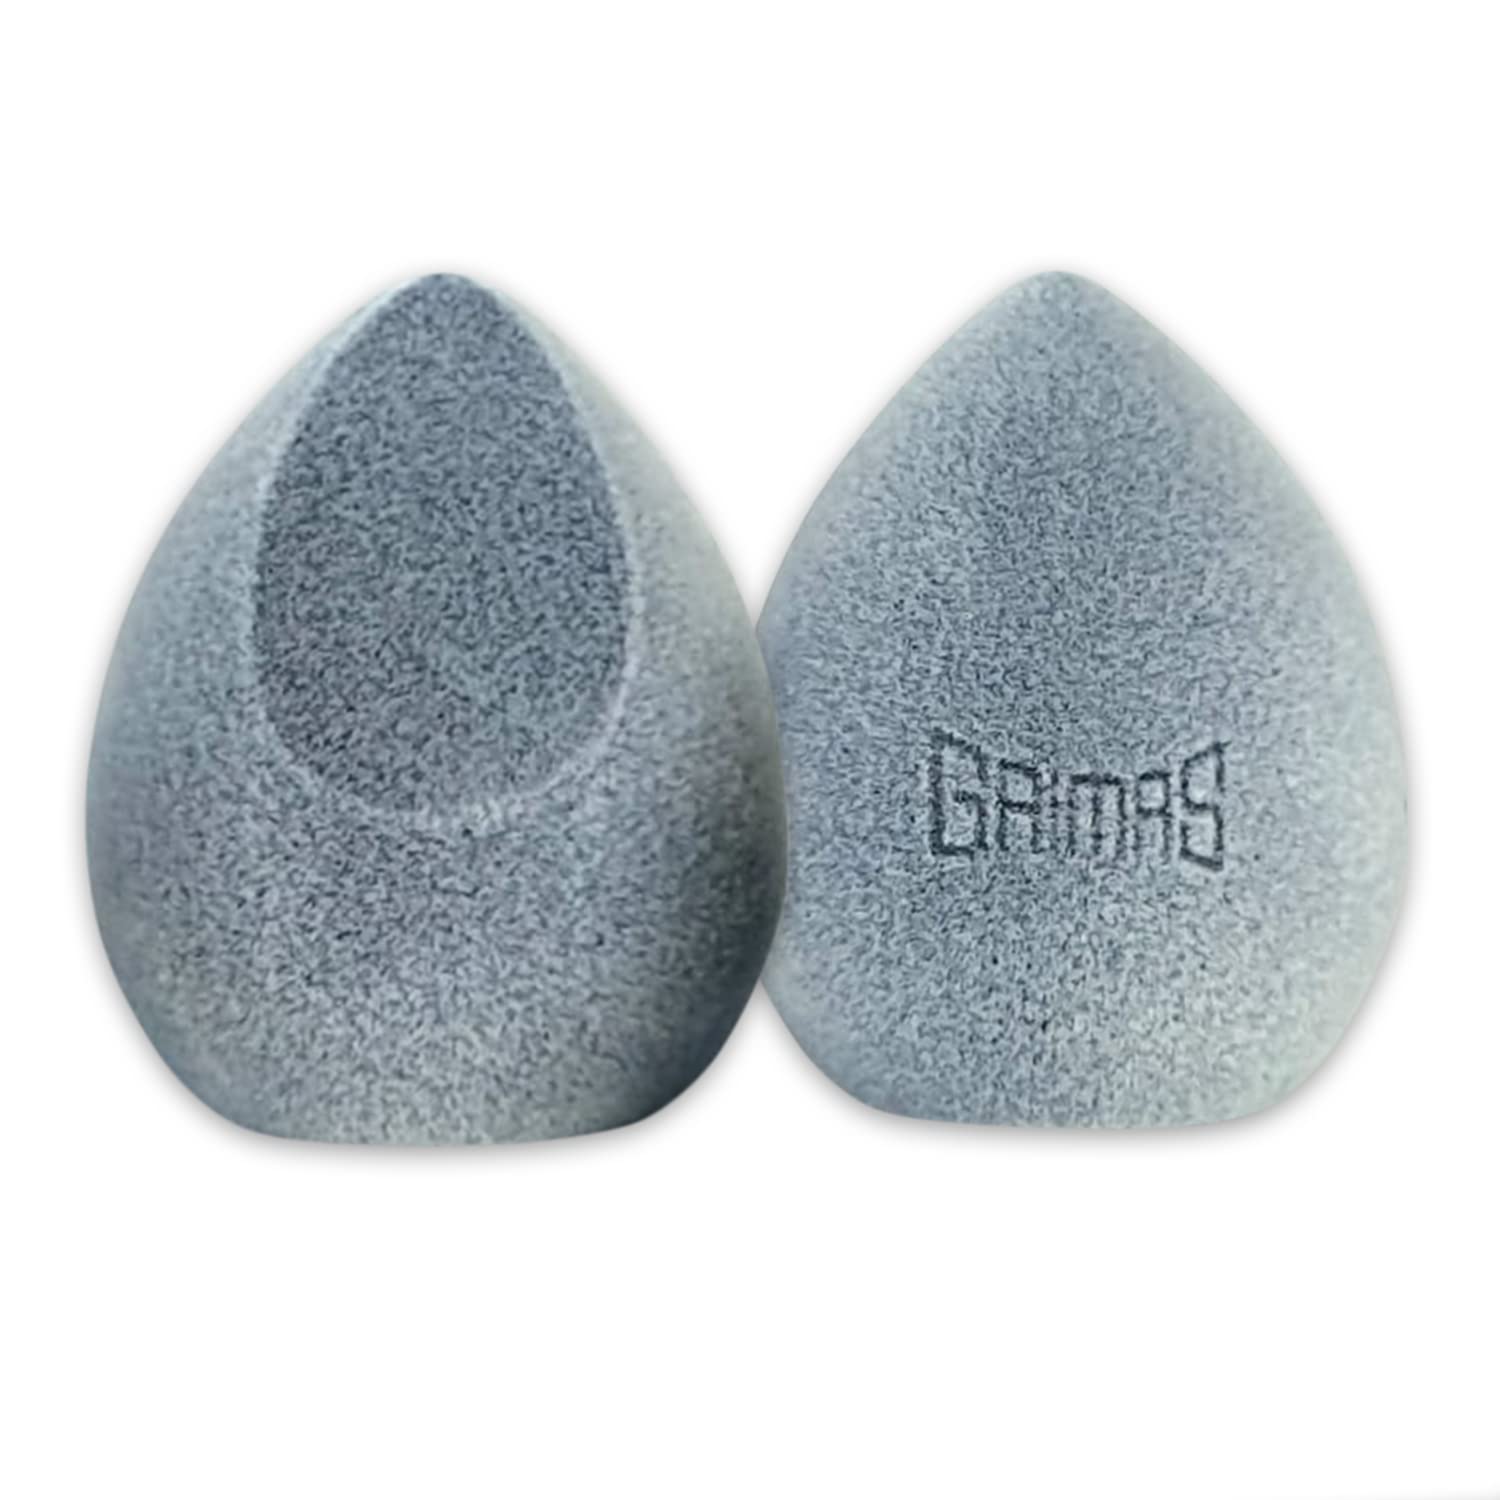 Grimas Professional teardrop sponge, teardrop shape, 6 x 5 cm, for large and small areas and all types of make-up, latex-free, washable, reusable